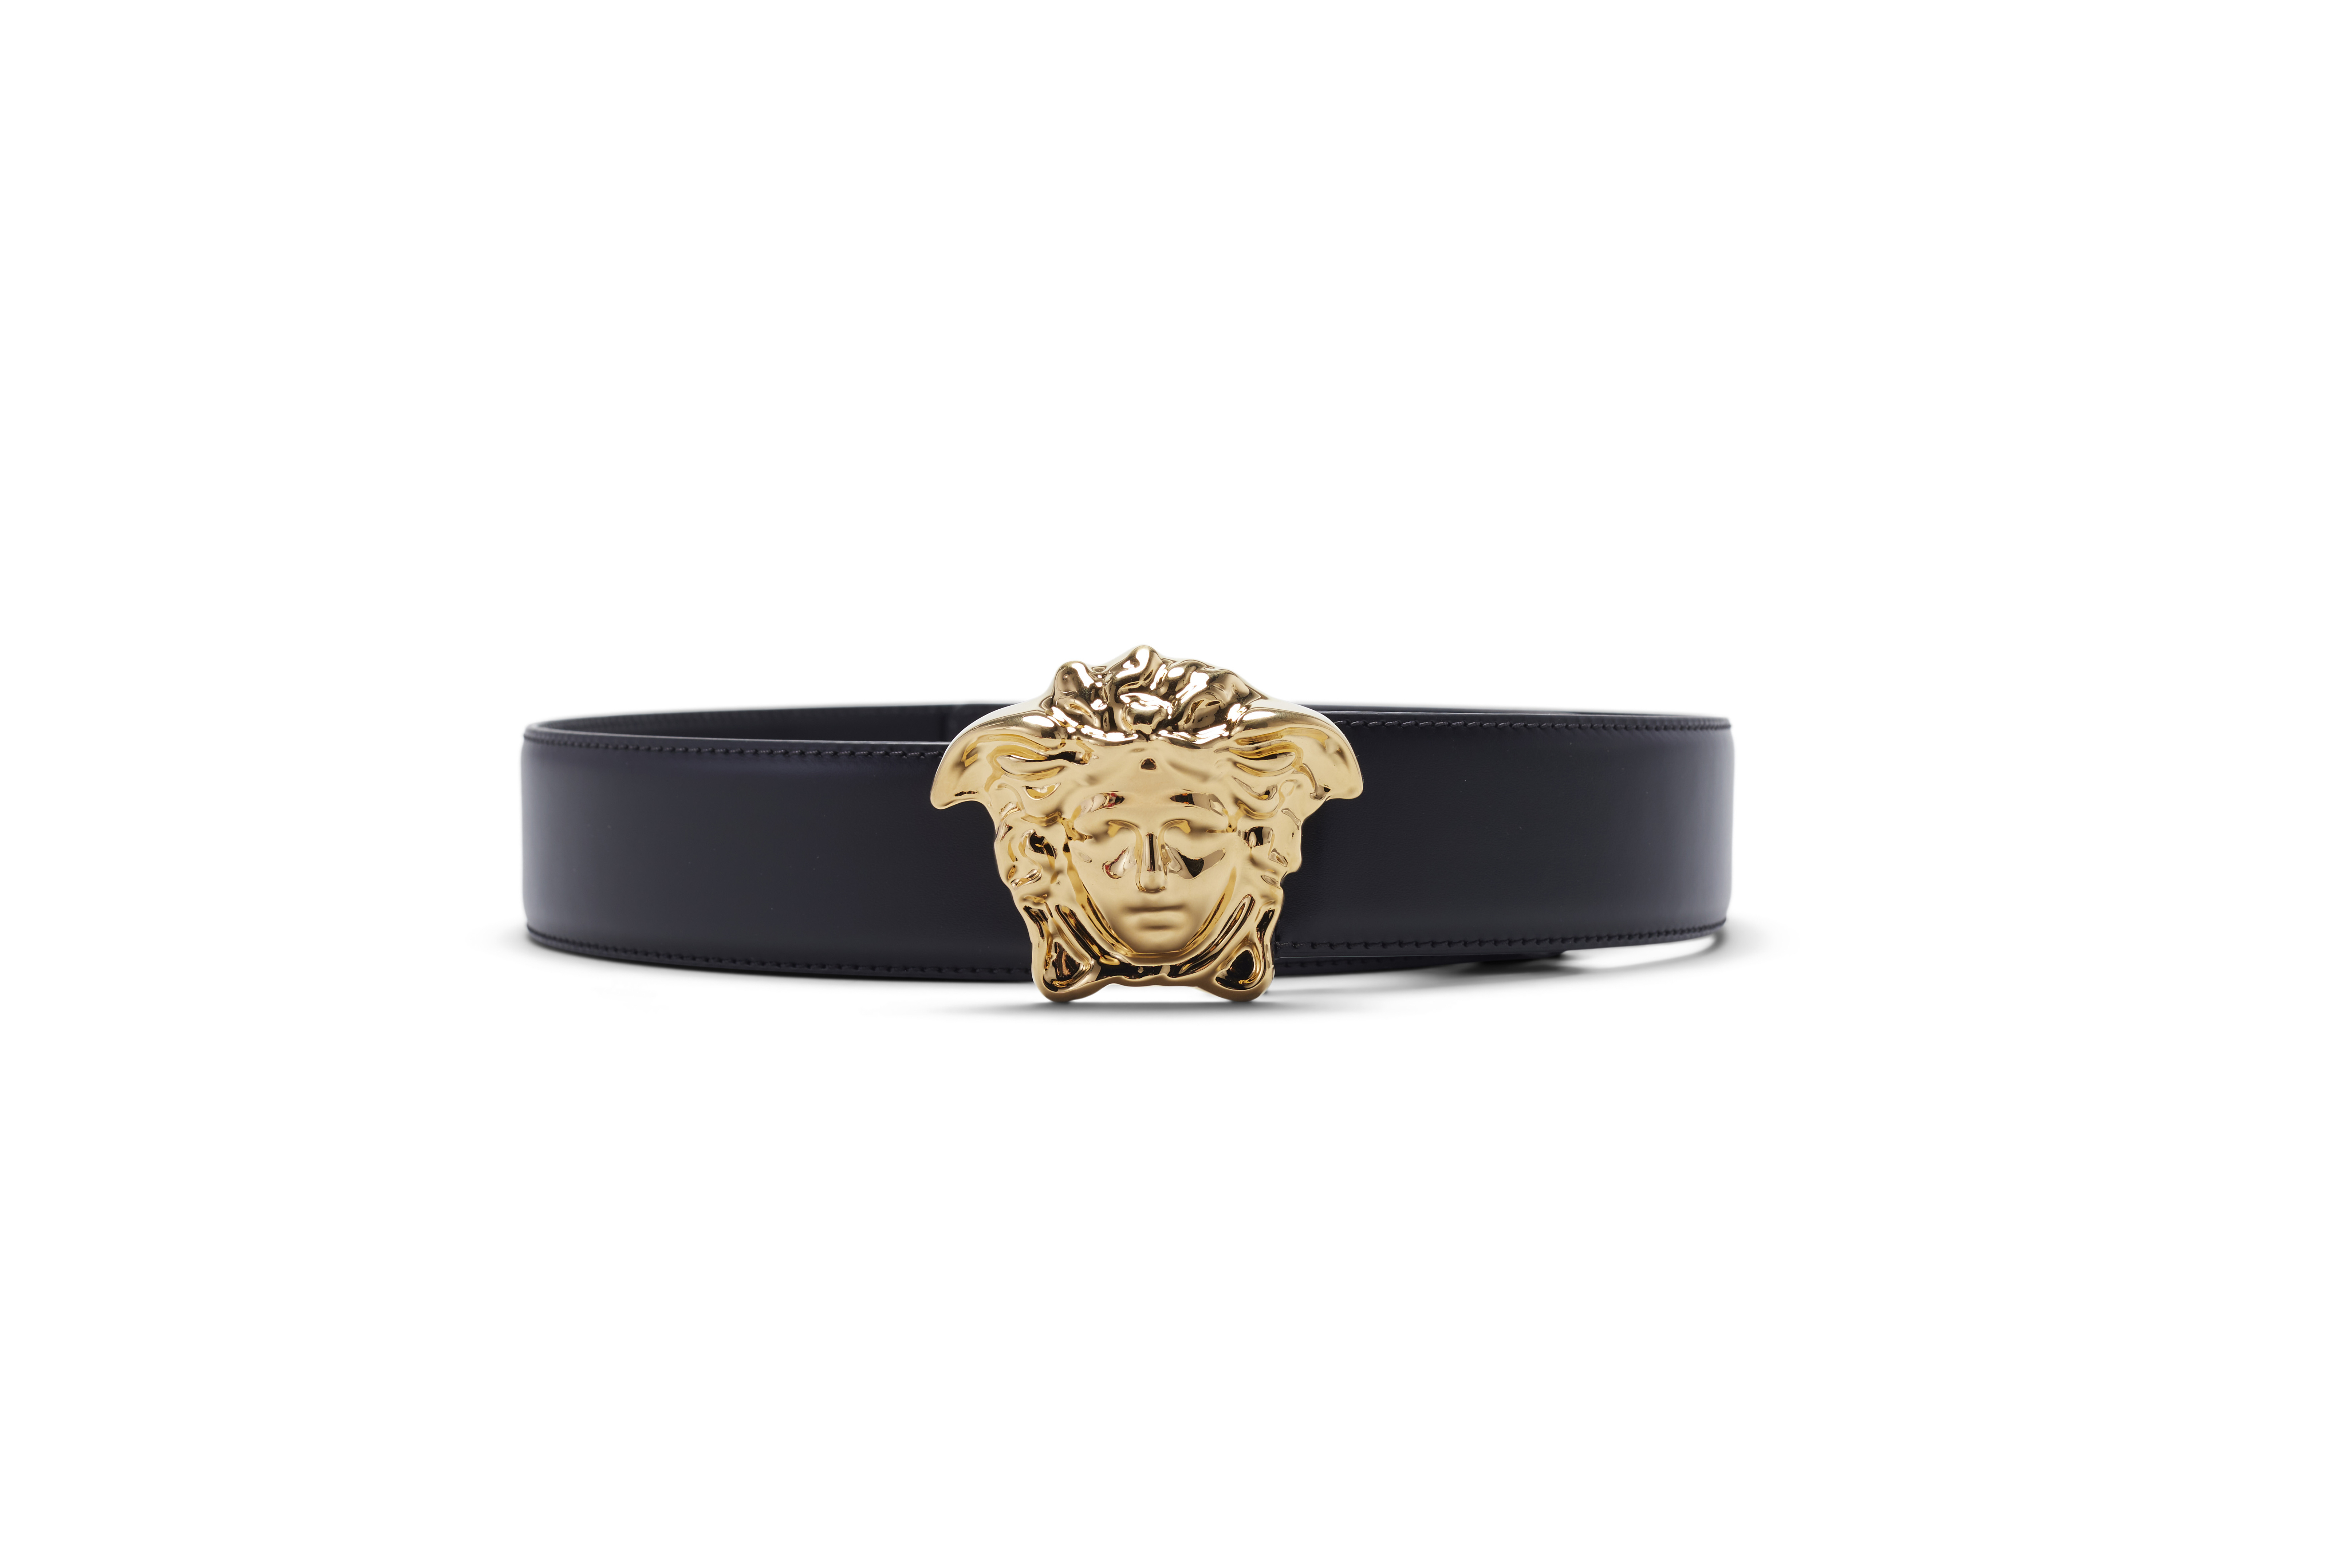 Versace Palazzo Belt with Medusa Buckle Gold-tone Black